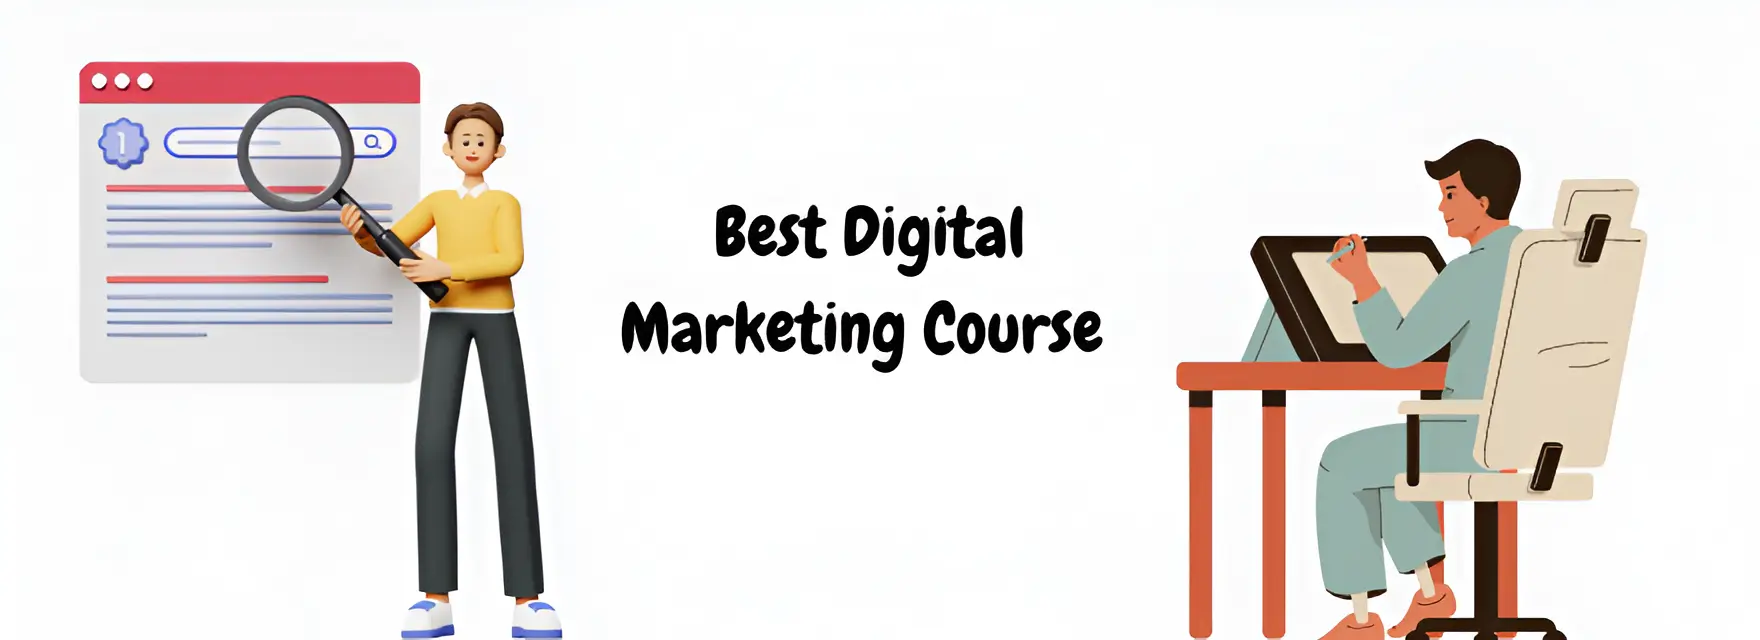 What Key factors to consider when choosing the best digital marketing course